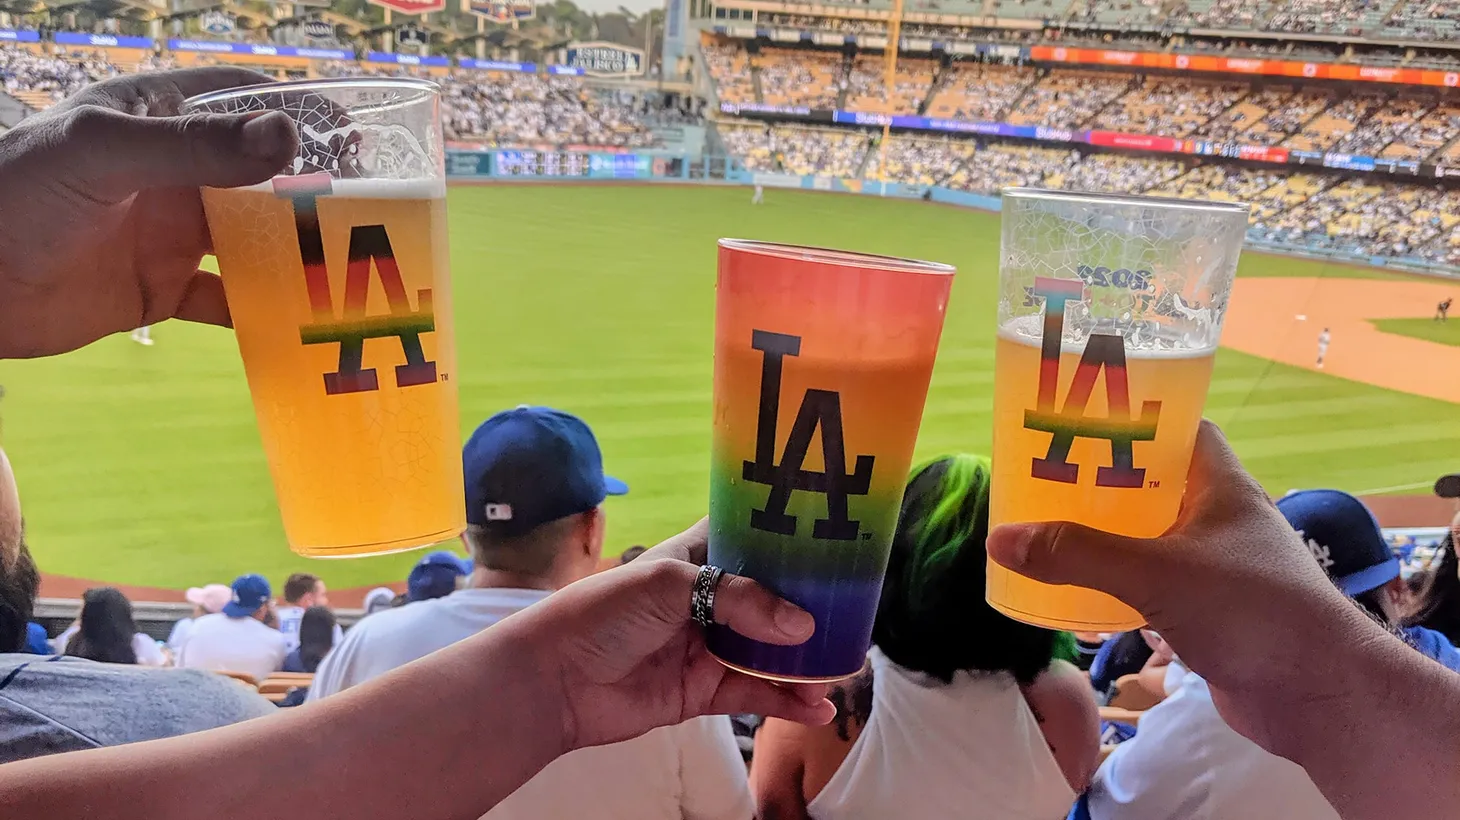 Dodgers, Giants Wear Pride Caps Supporting LGBTQ+ in Same Game for